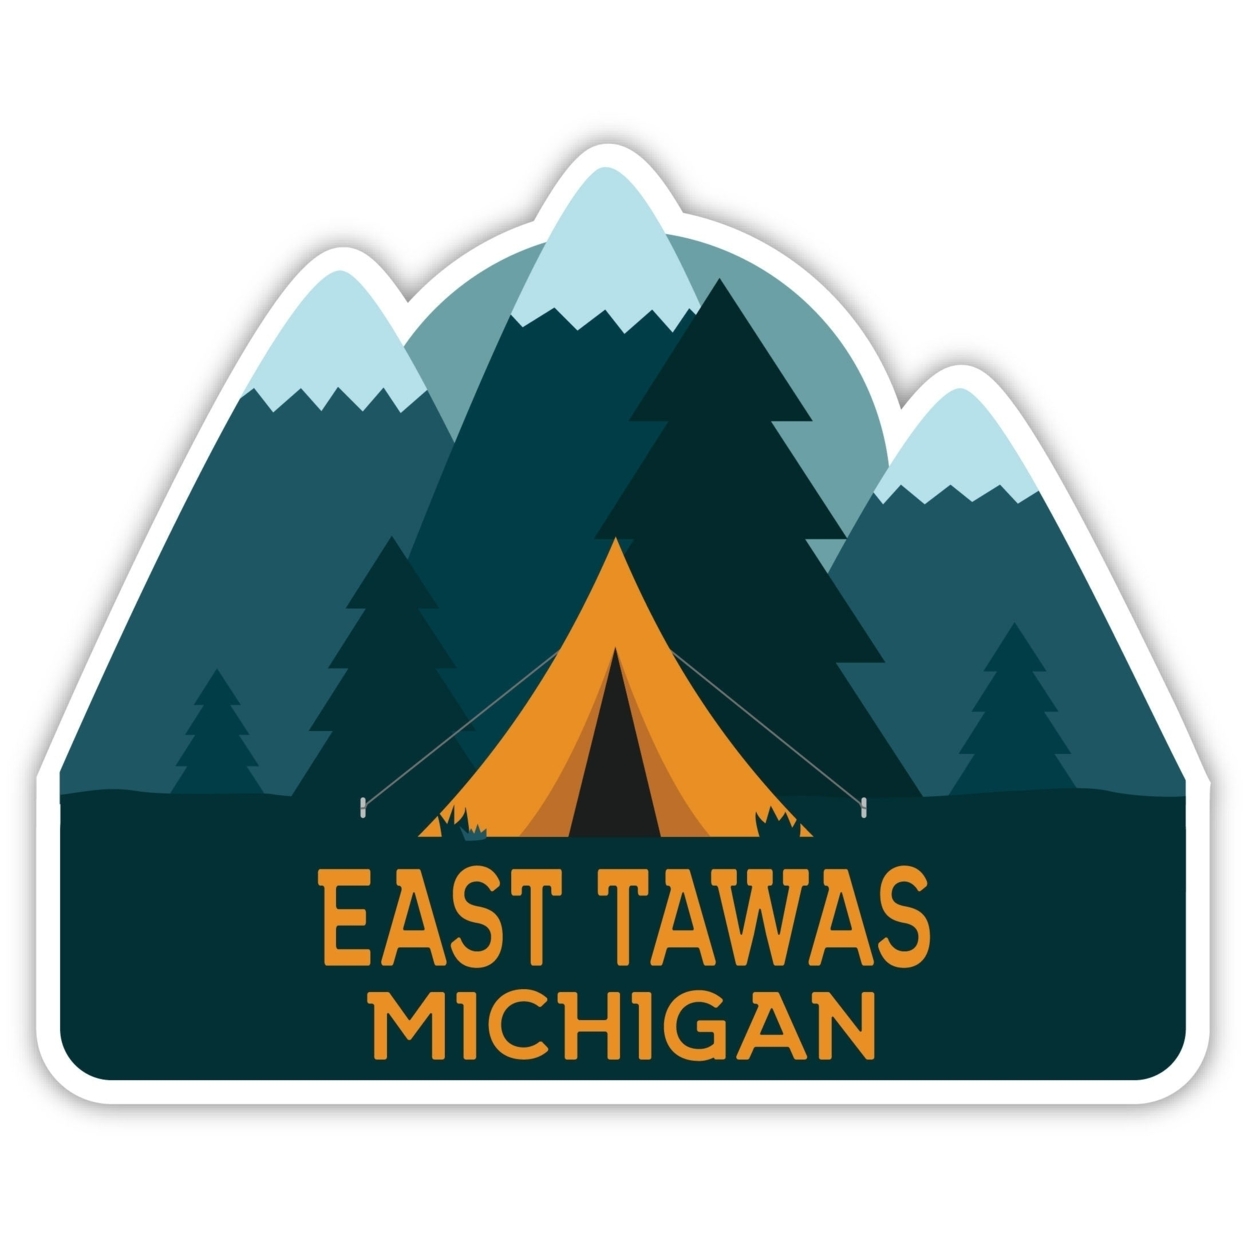 East Tawas Michigan Souvenir Decorative Stickers (Choose Theme And Size) - 4-Pack, 10-Inch, Camp Life